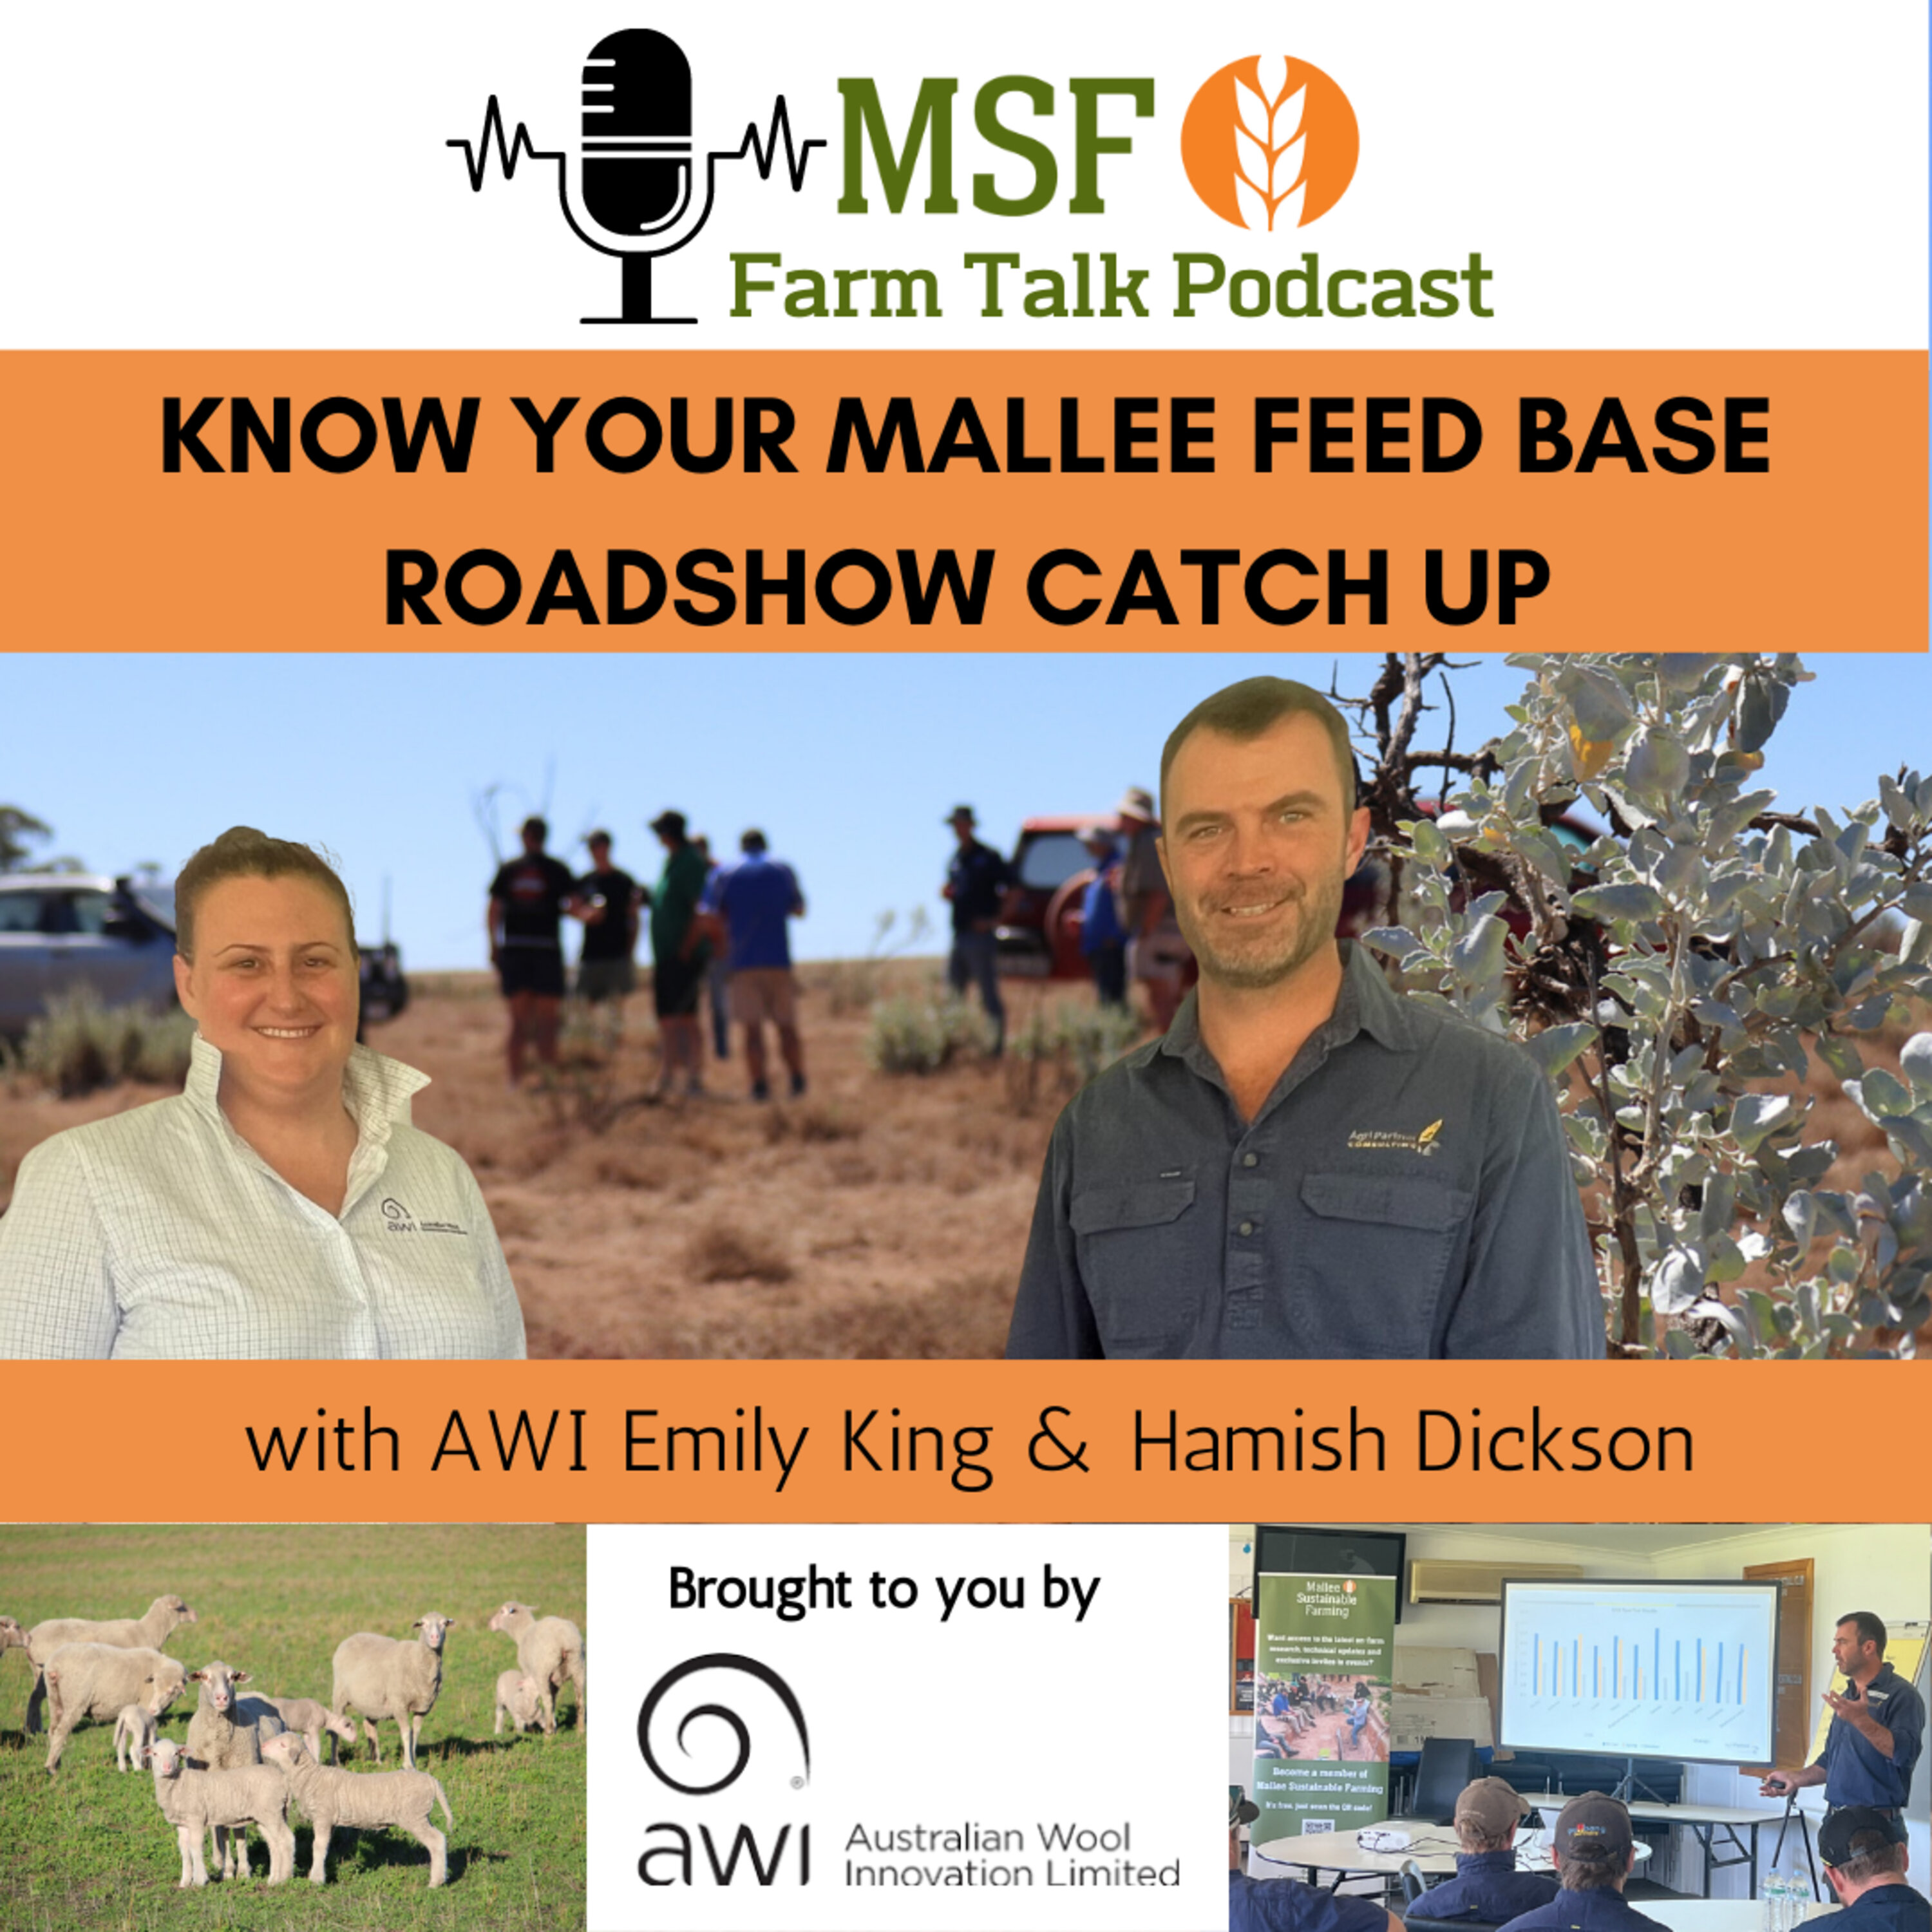 Know your Mallee feed base roadshow catch up.